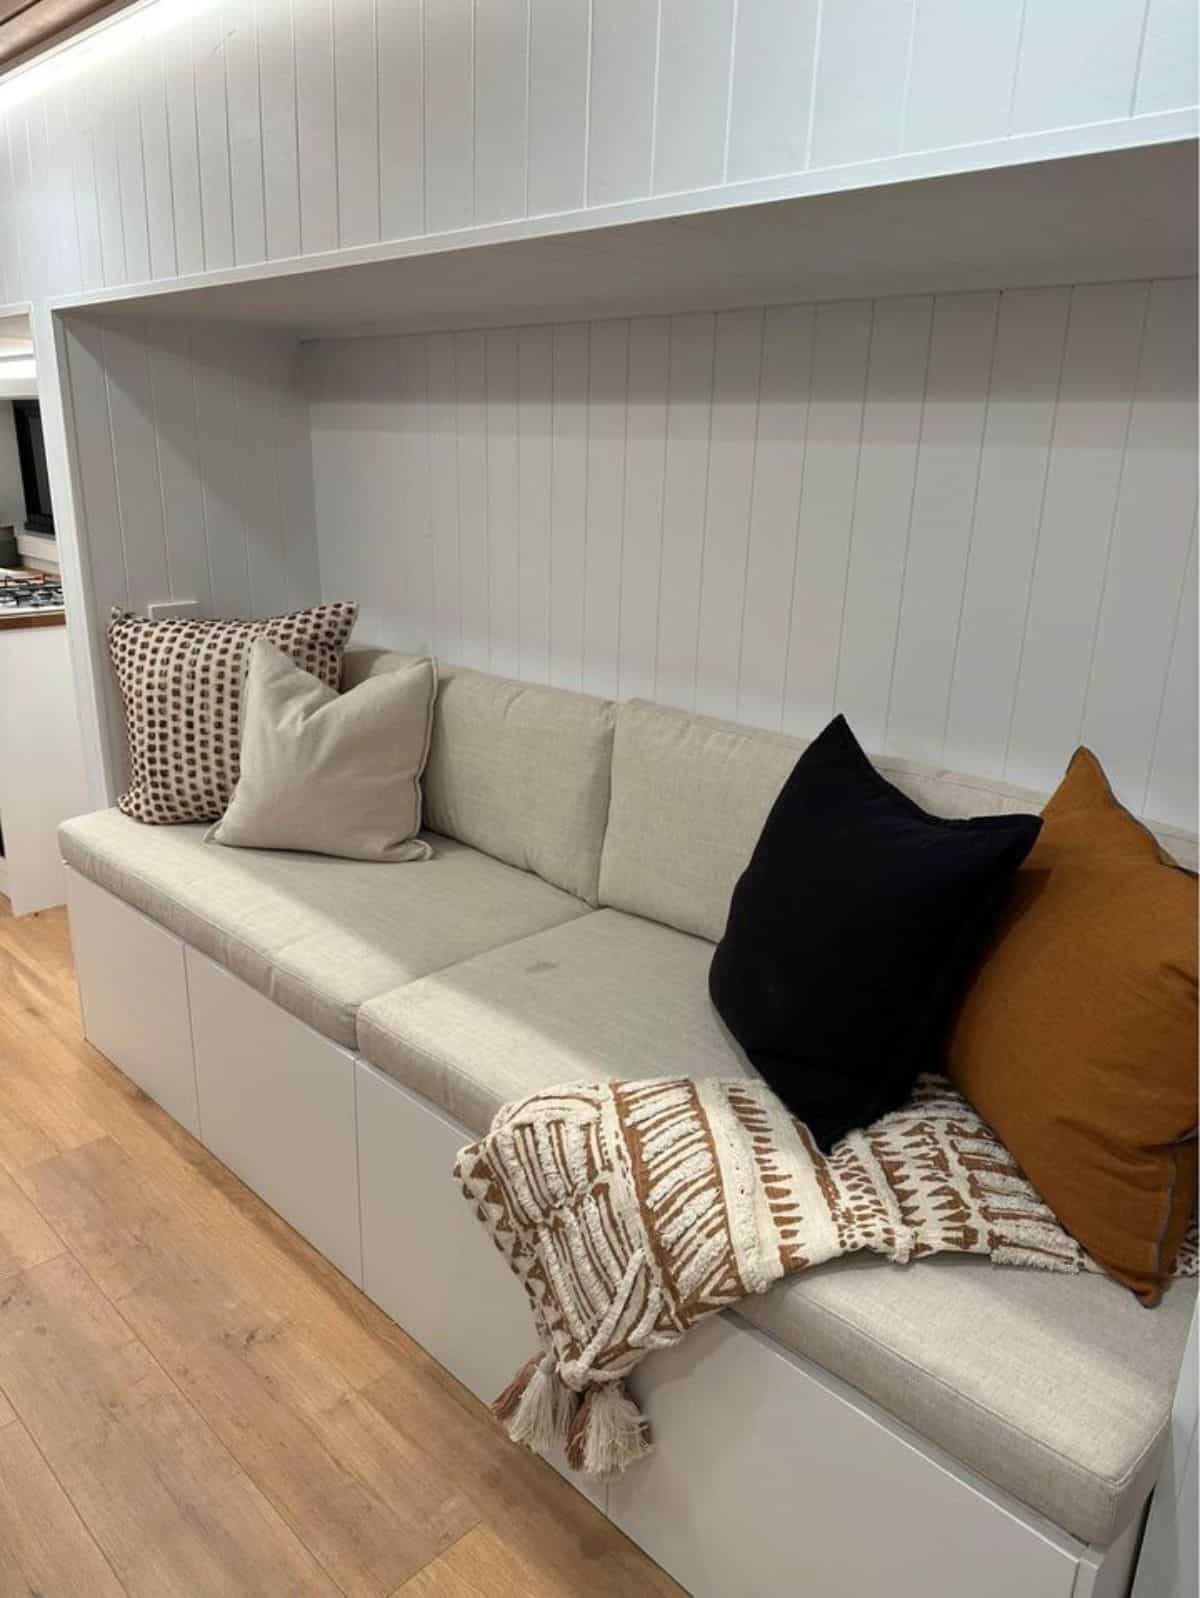 4 seater couch in living area of Australian tiny home